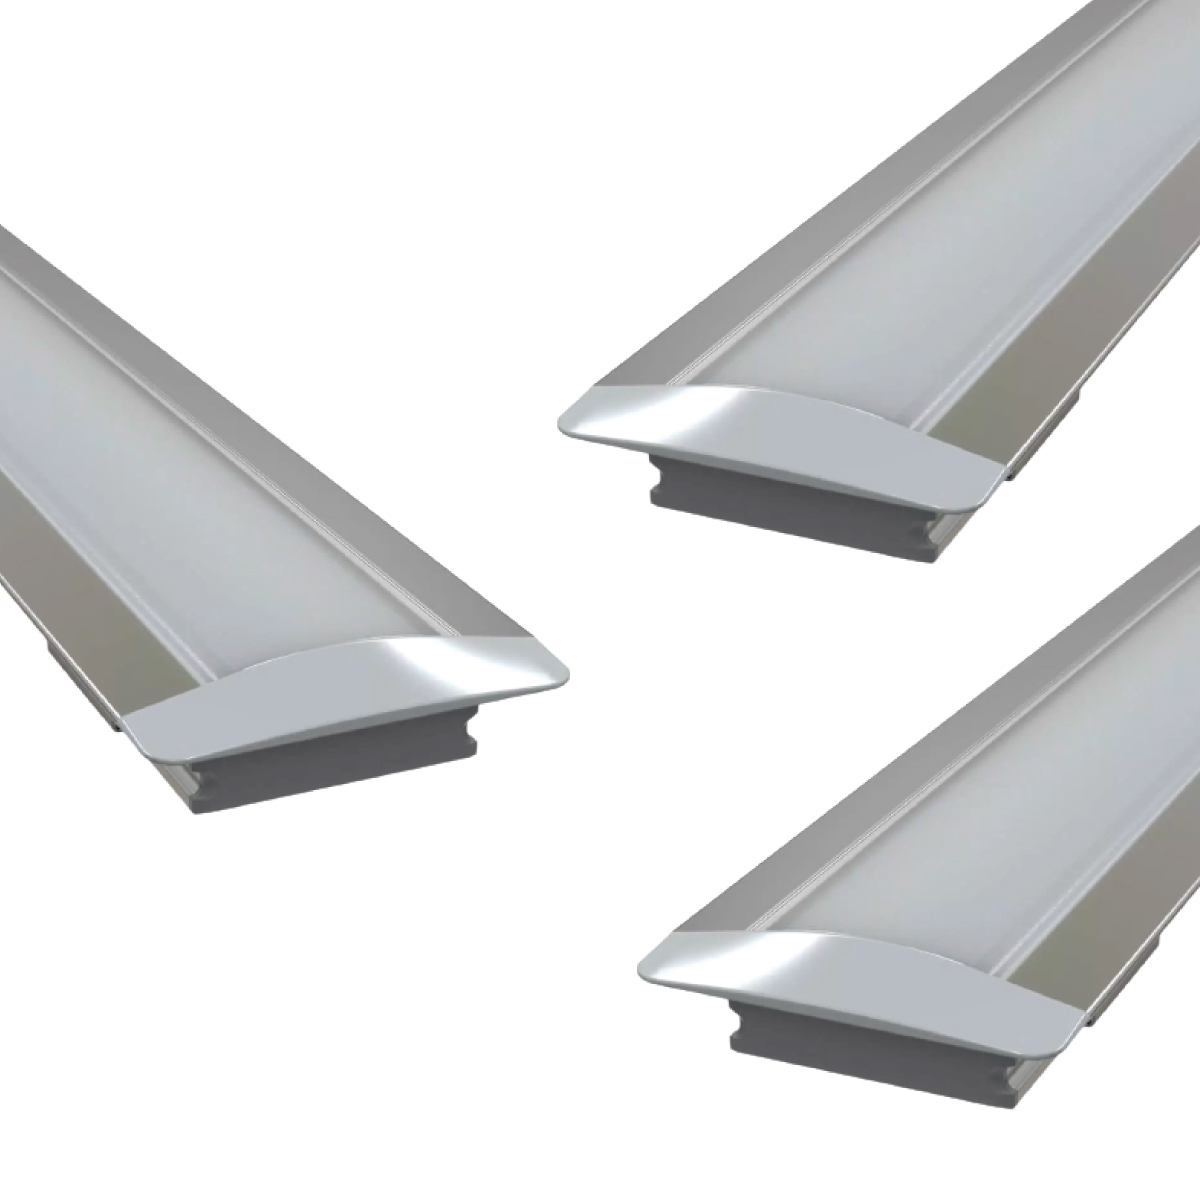 View Pack of 3 Shallow 7mm Recessed LED Aluminium Profiles 2m Long information